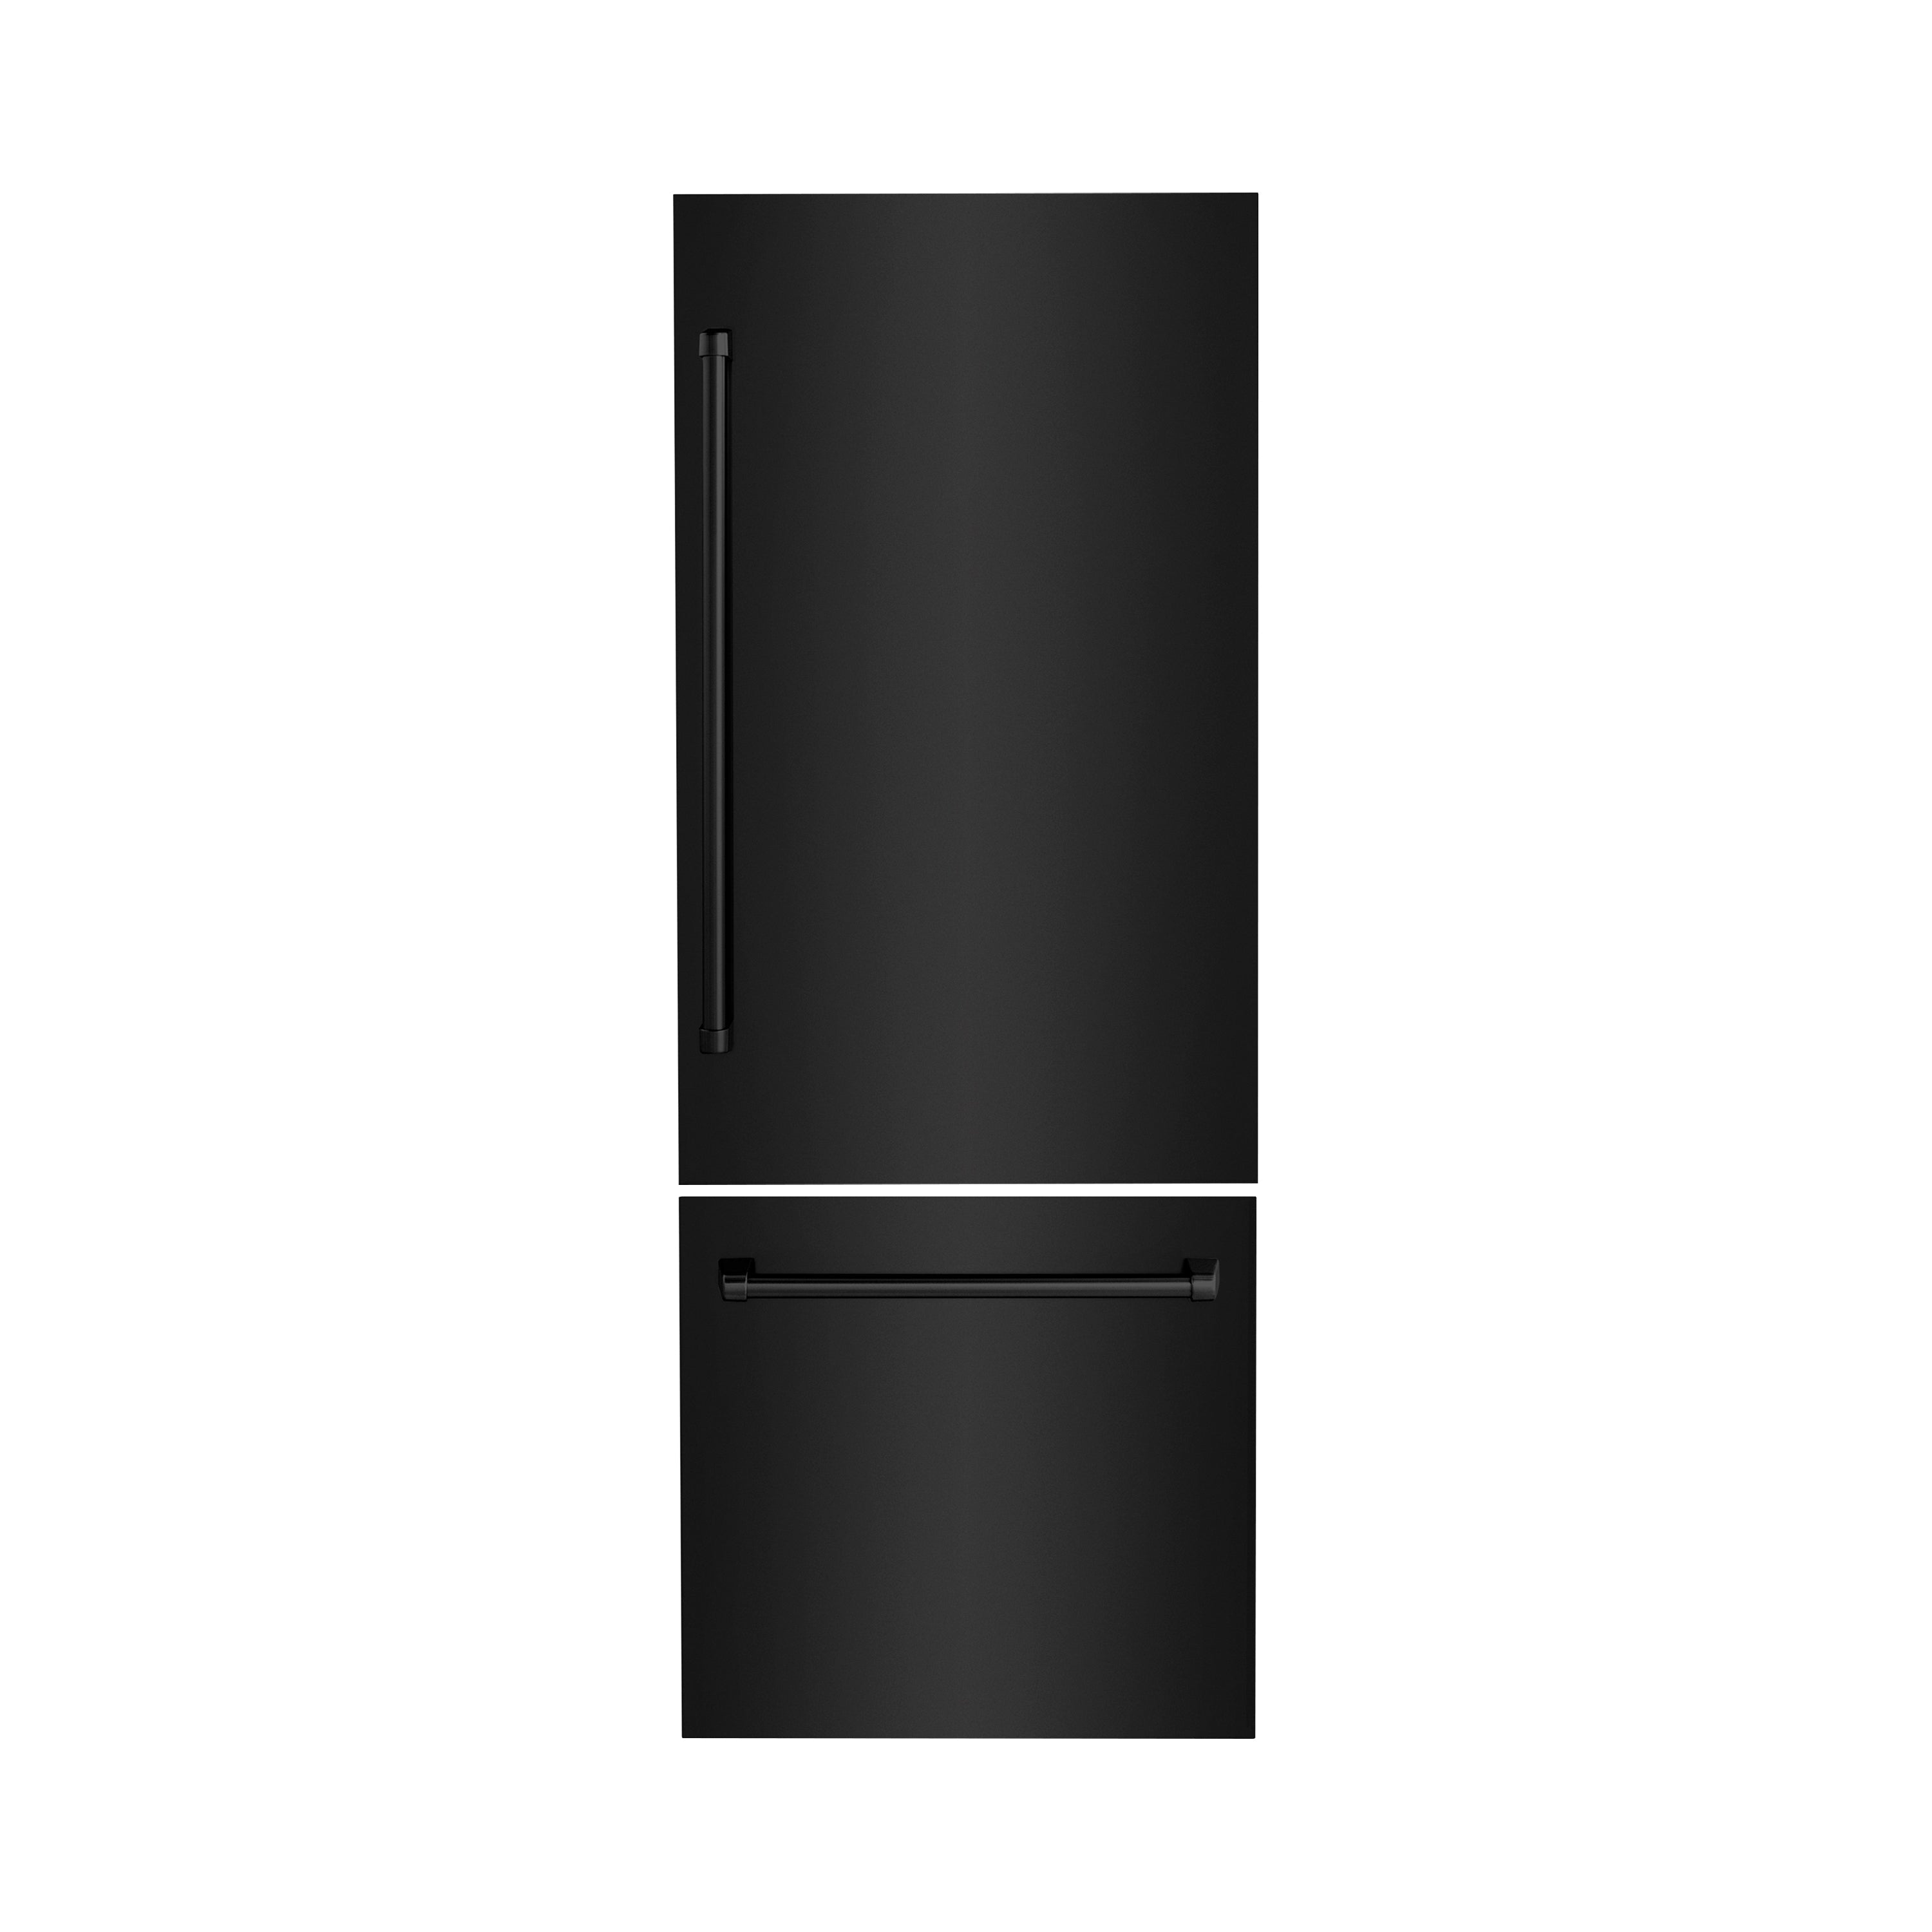 ZLINE 30" Refrigerator Panels in Black Stainless Steel for a 30" Buit-in Refrigerator (RPBIV-BS-30)